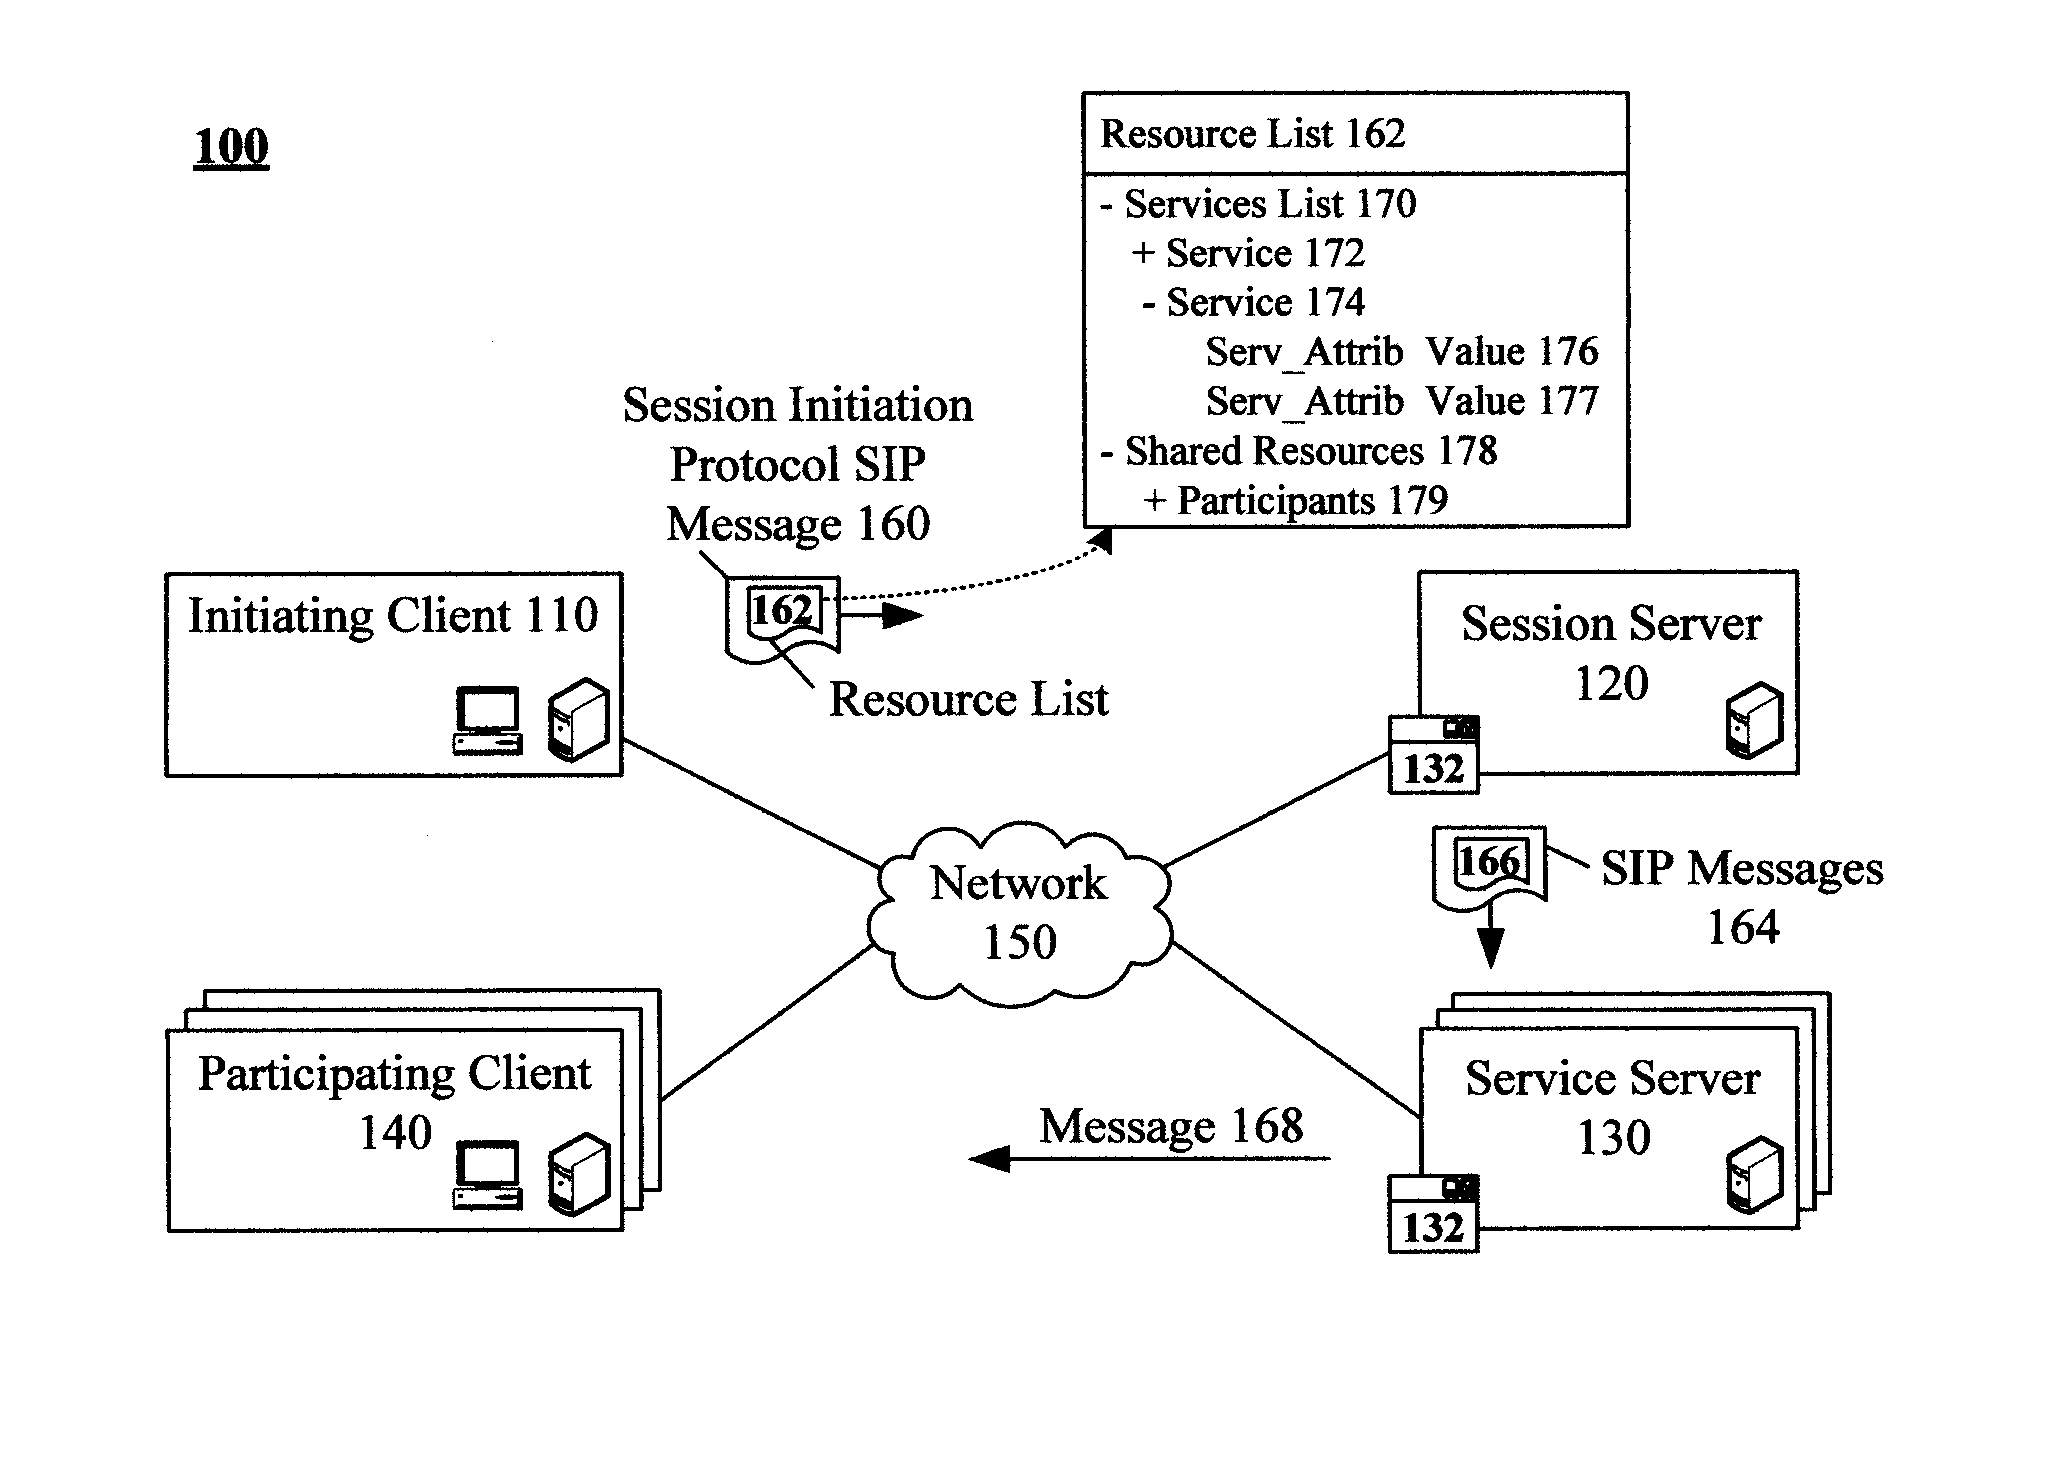 Invoking multiple sip based services during a single communication session using resource lists